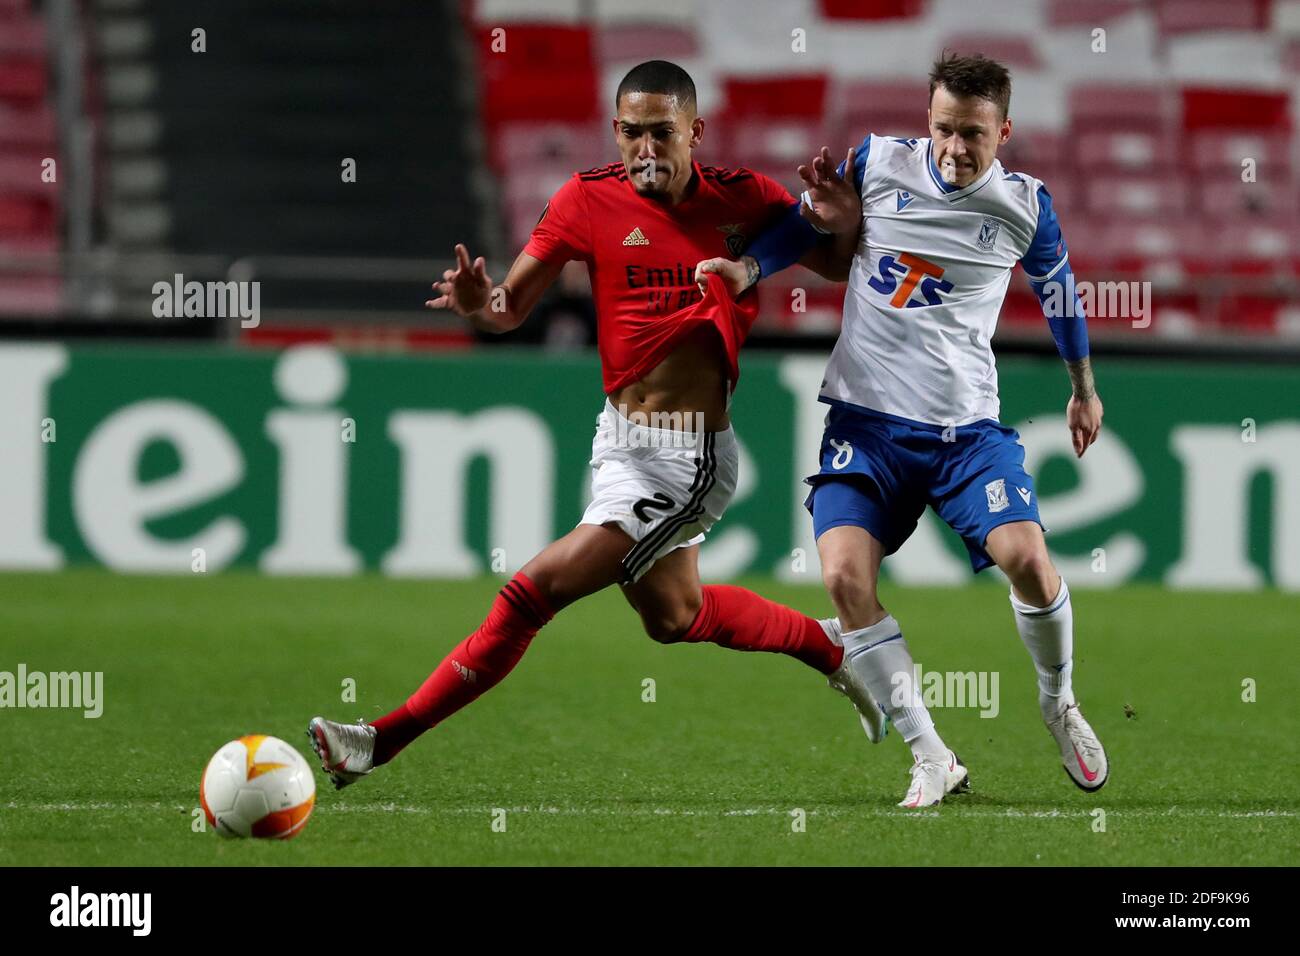 Lisbon, Portugal. 3rd Dec, 2020. Gilberto of SL Benfica (L) vies with Jan Sykora of Lech Poznan during the UEFA Europa League Group D football match between SL Benfica and Lech Poznan at the Luz stadium in Lisbon, Portugal on December 3, 2020. Credit: Pedro Fiuza/ZUMA Wire/Alamy Live News Stock Photo